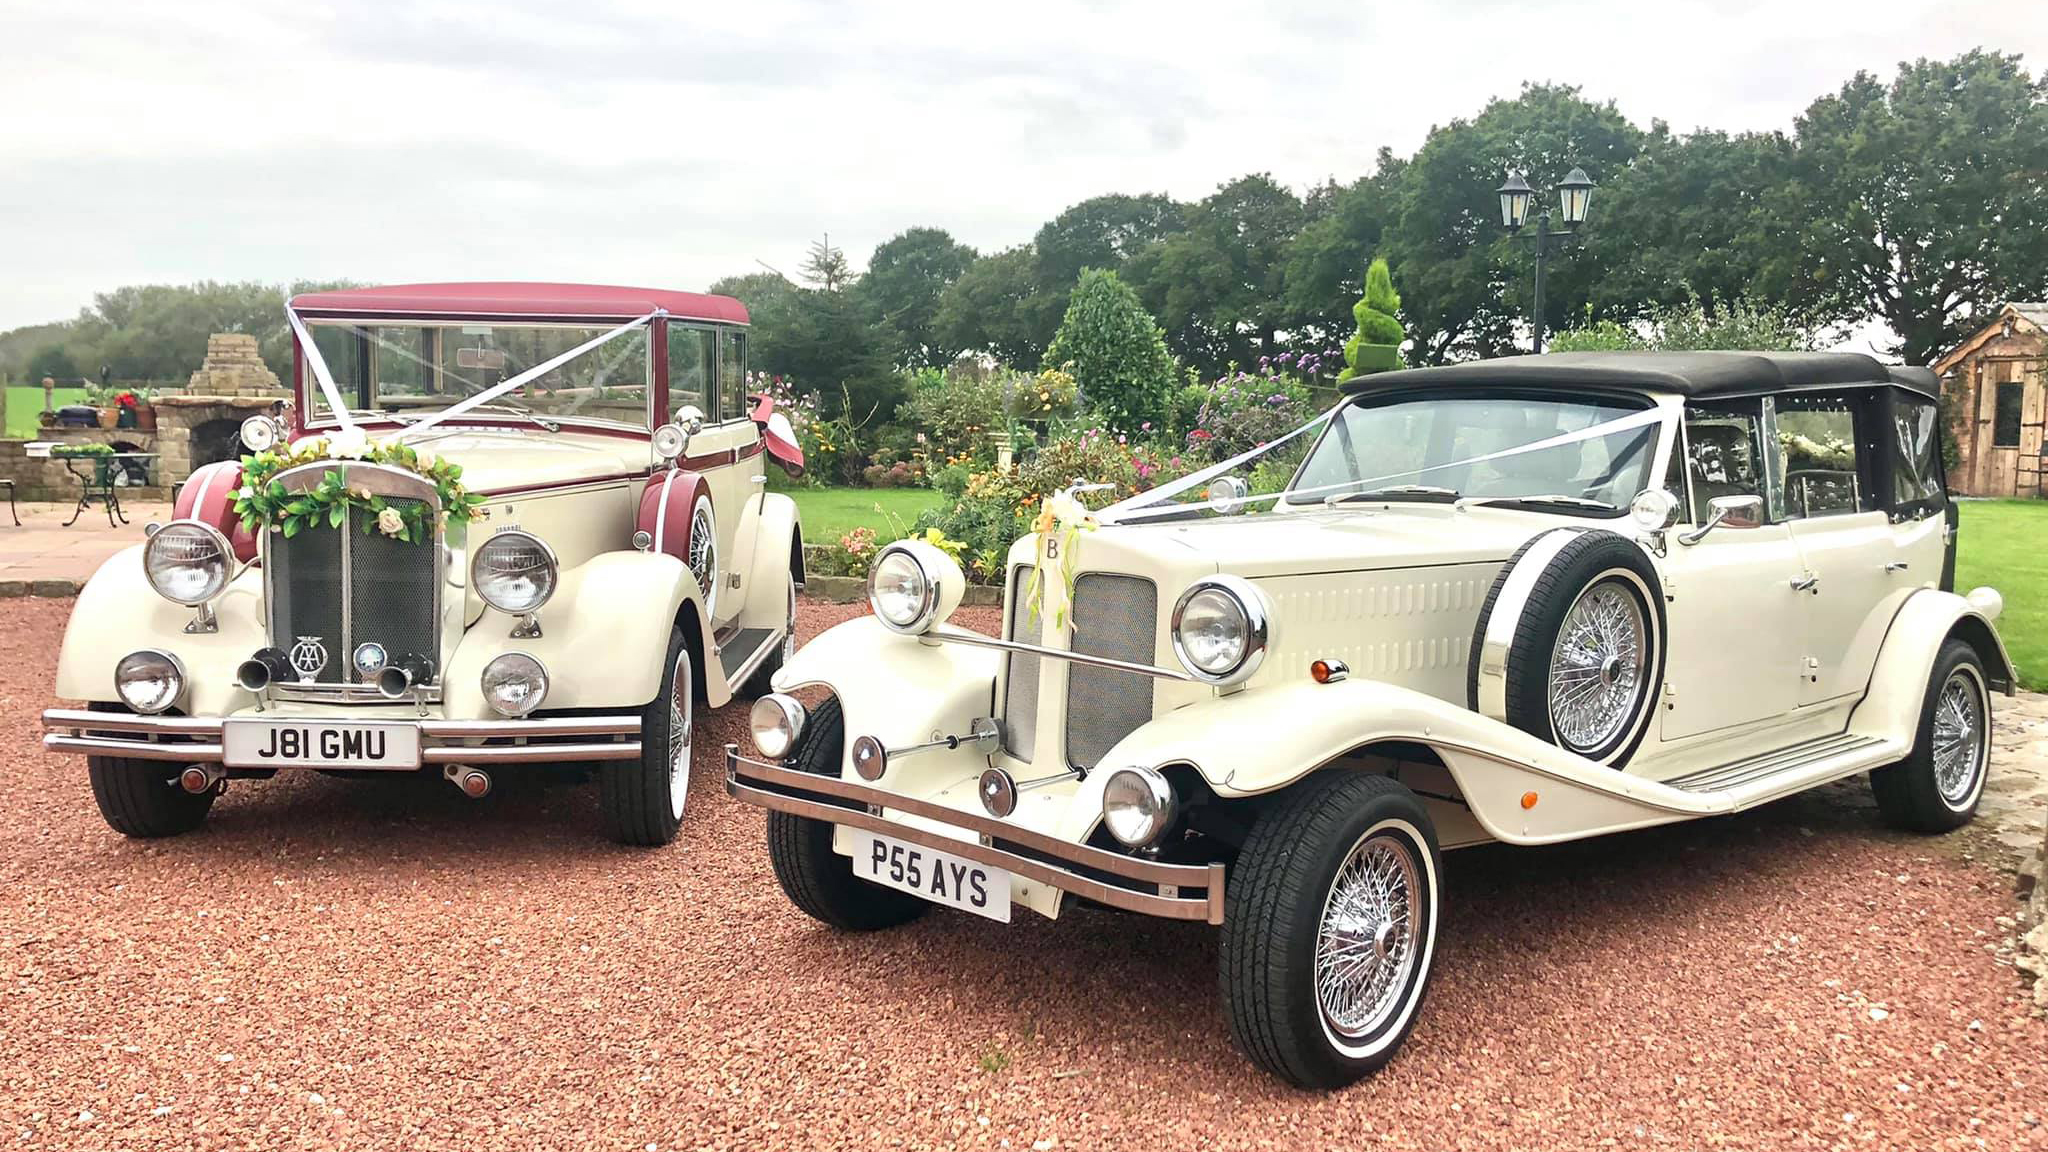 Two vintage wedding cars decorated with white ribbons and bows at a local Lytham St Anne's wedding. Both vehicles are parked side-by-side